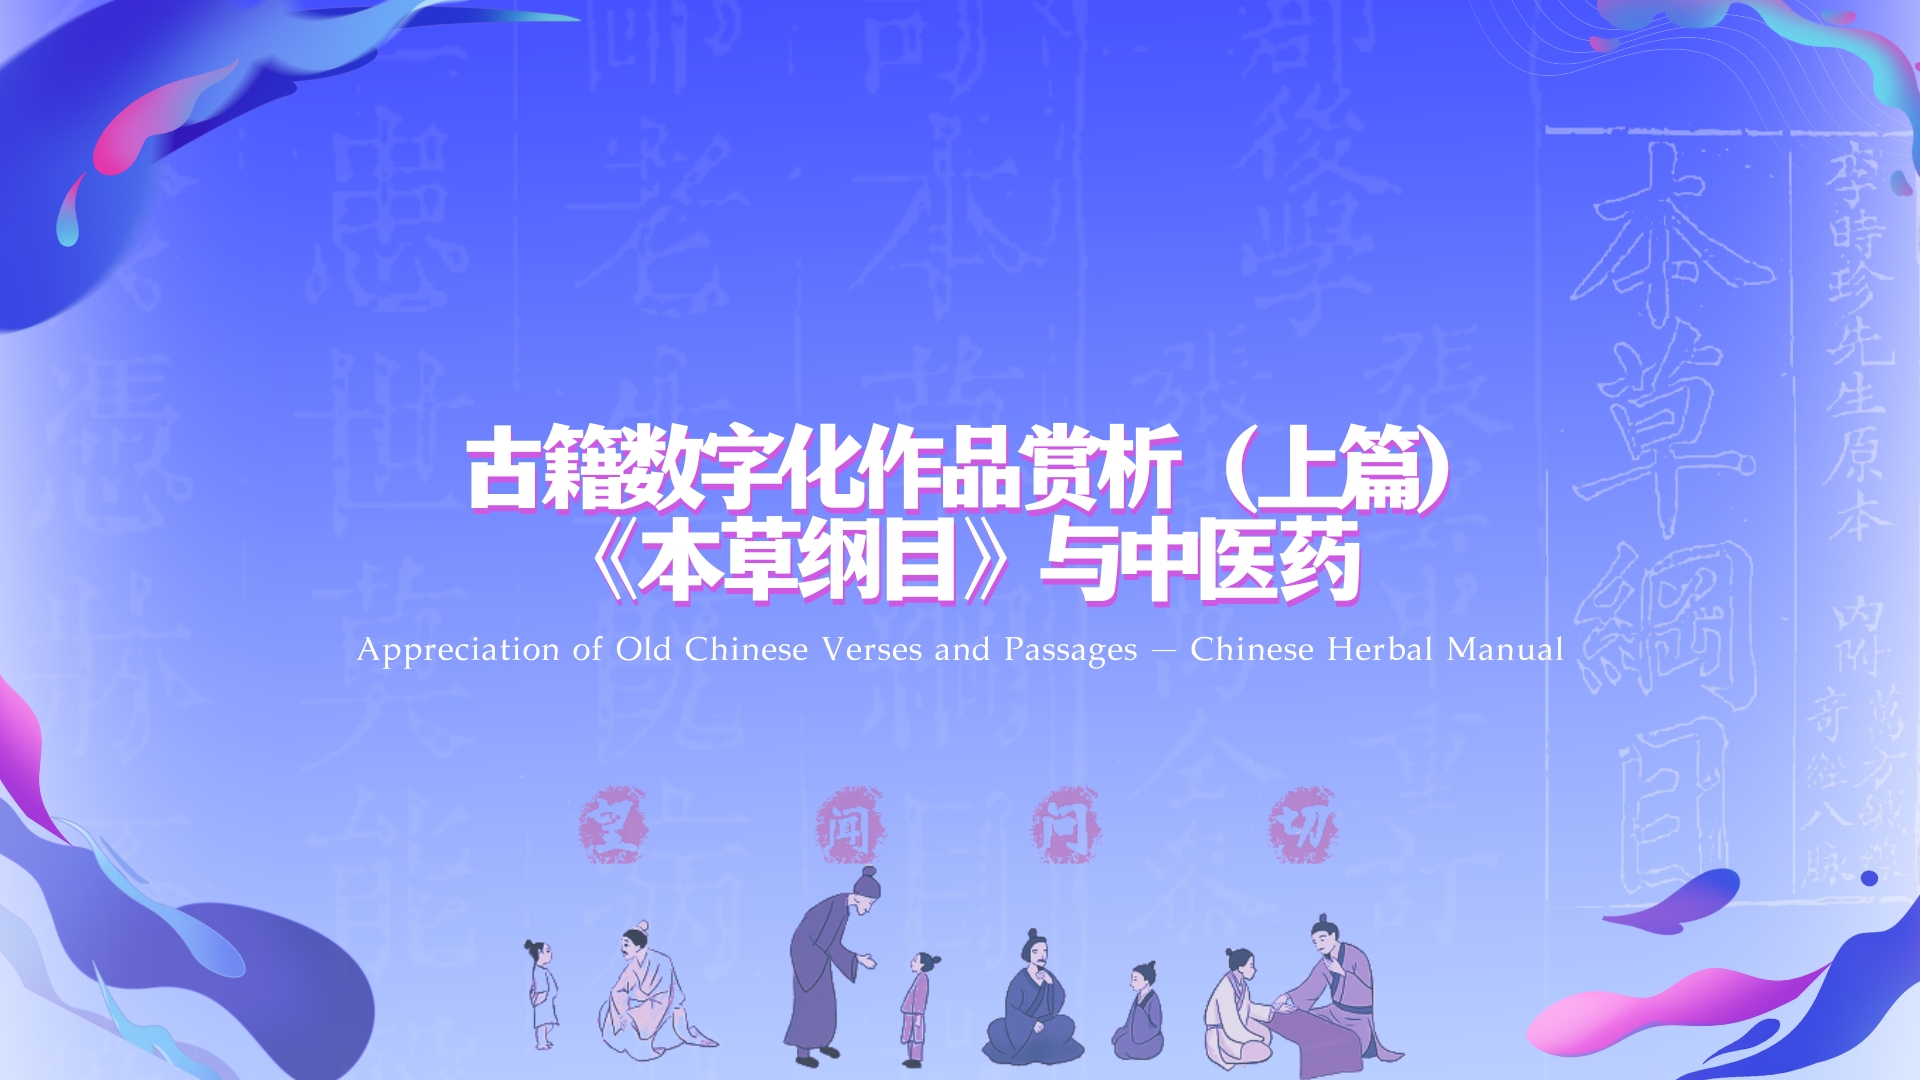 Lecture 8 Appreciation of Old Chinese Verses and Passages — Chinese Herbal Manual